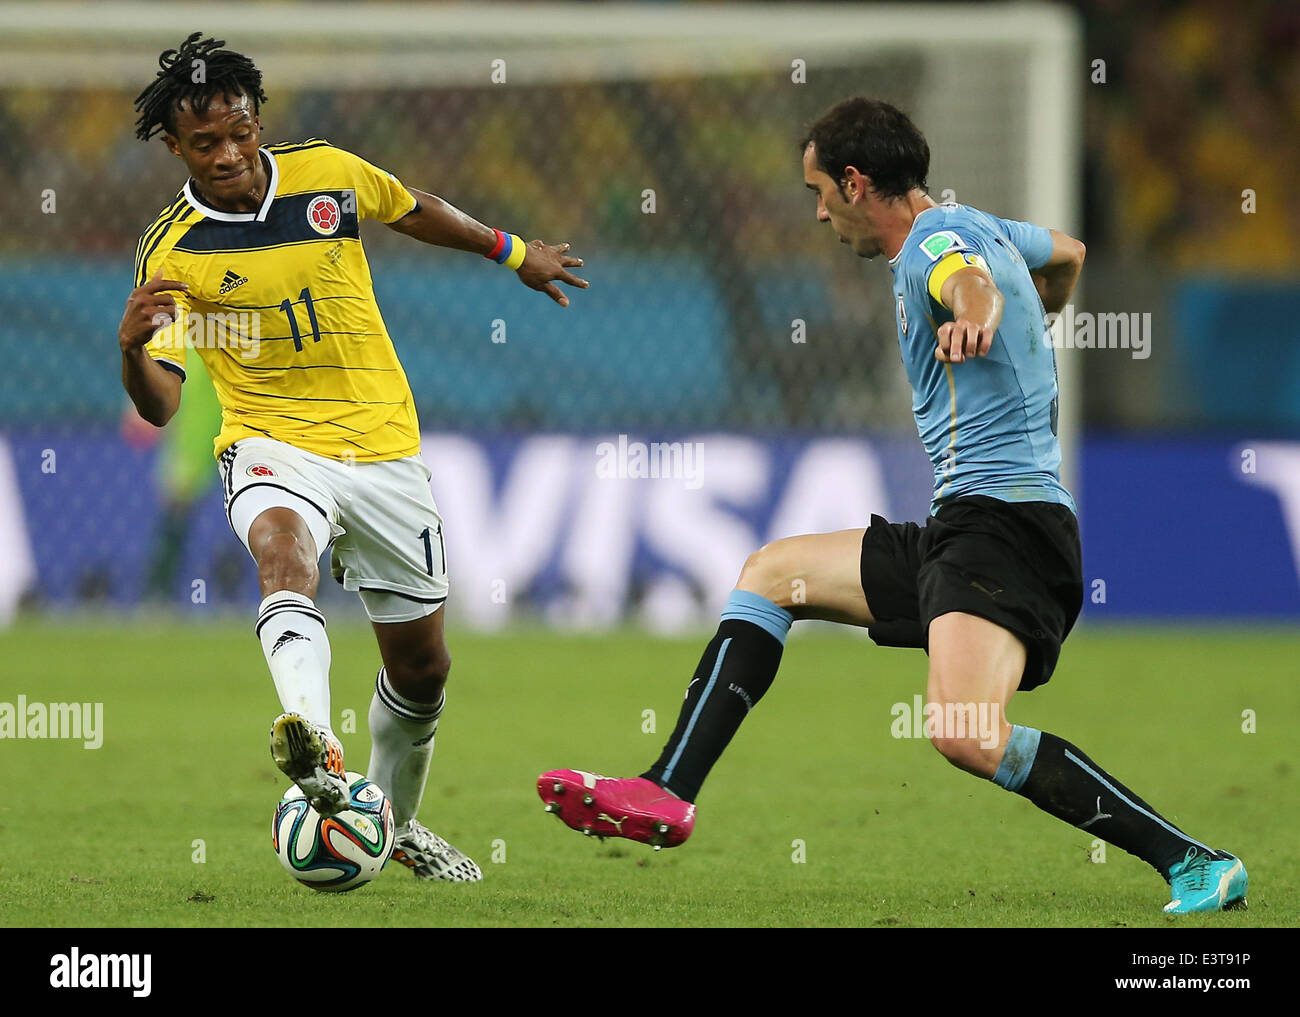 Rio De Janeiro, Brazil. 28th June, 2014. Colombia's Juan Guillermo Cuadrado controls the ball during a Round of 16 match between Colombia and Uruguay of 2014 FIFA World Cup at the Estadio do Maracana Stadium in Rio de Janeiro, Brazil, on June 28, 2014. Colombia won 2-0 over Uruguay on Saturday. Credit:  Xu Zijian/Xinhua/Alamy Live News Stock Photo